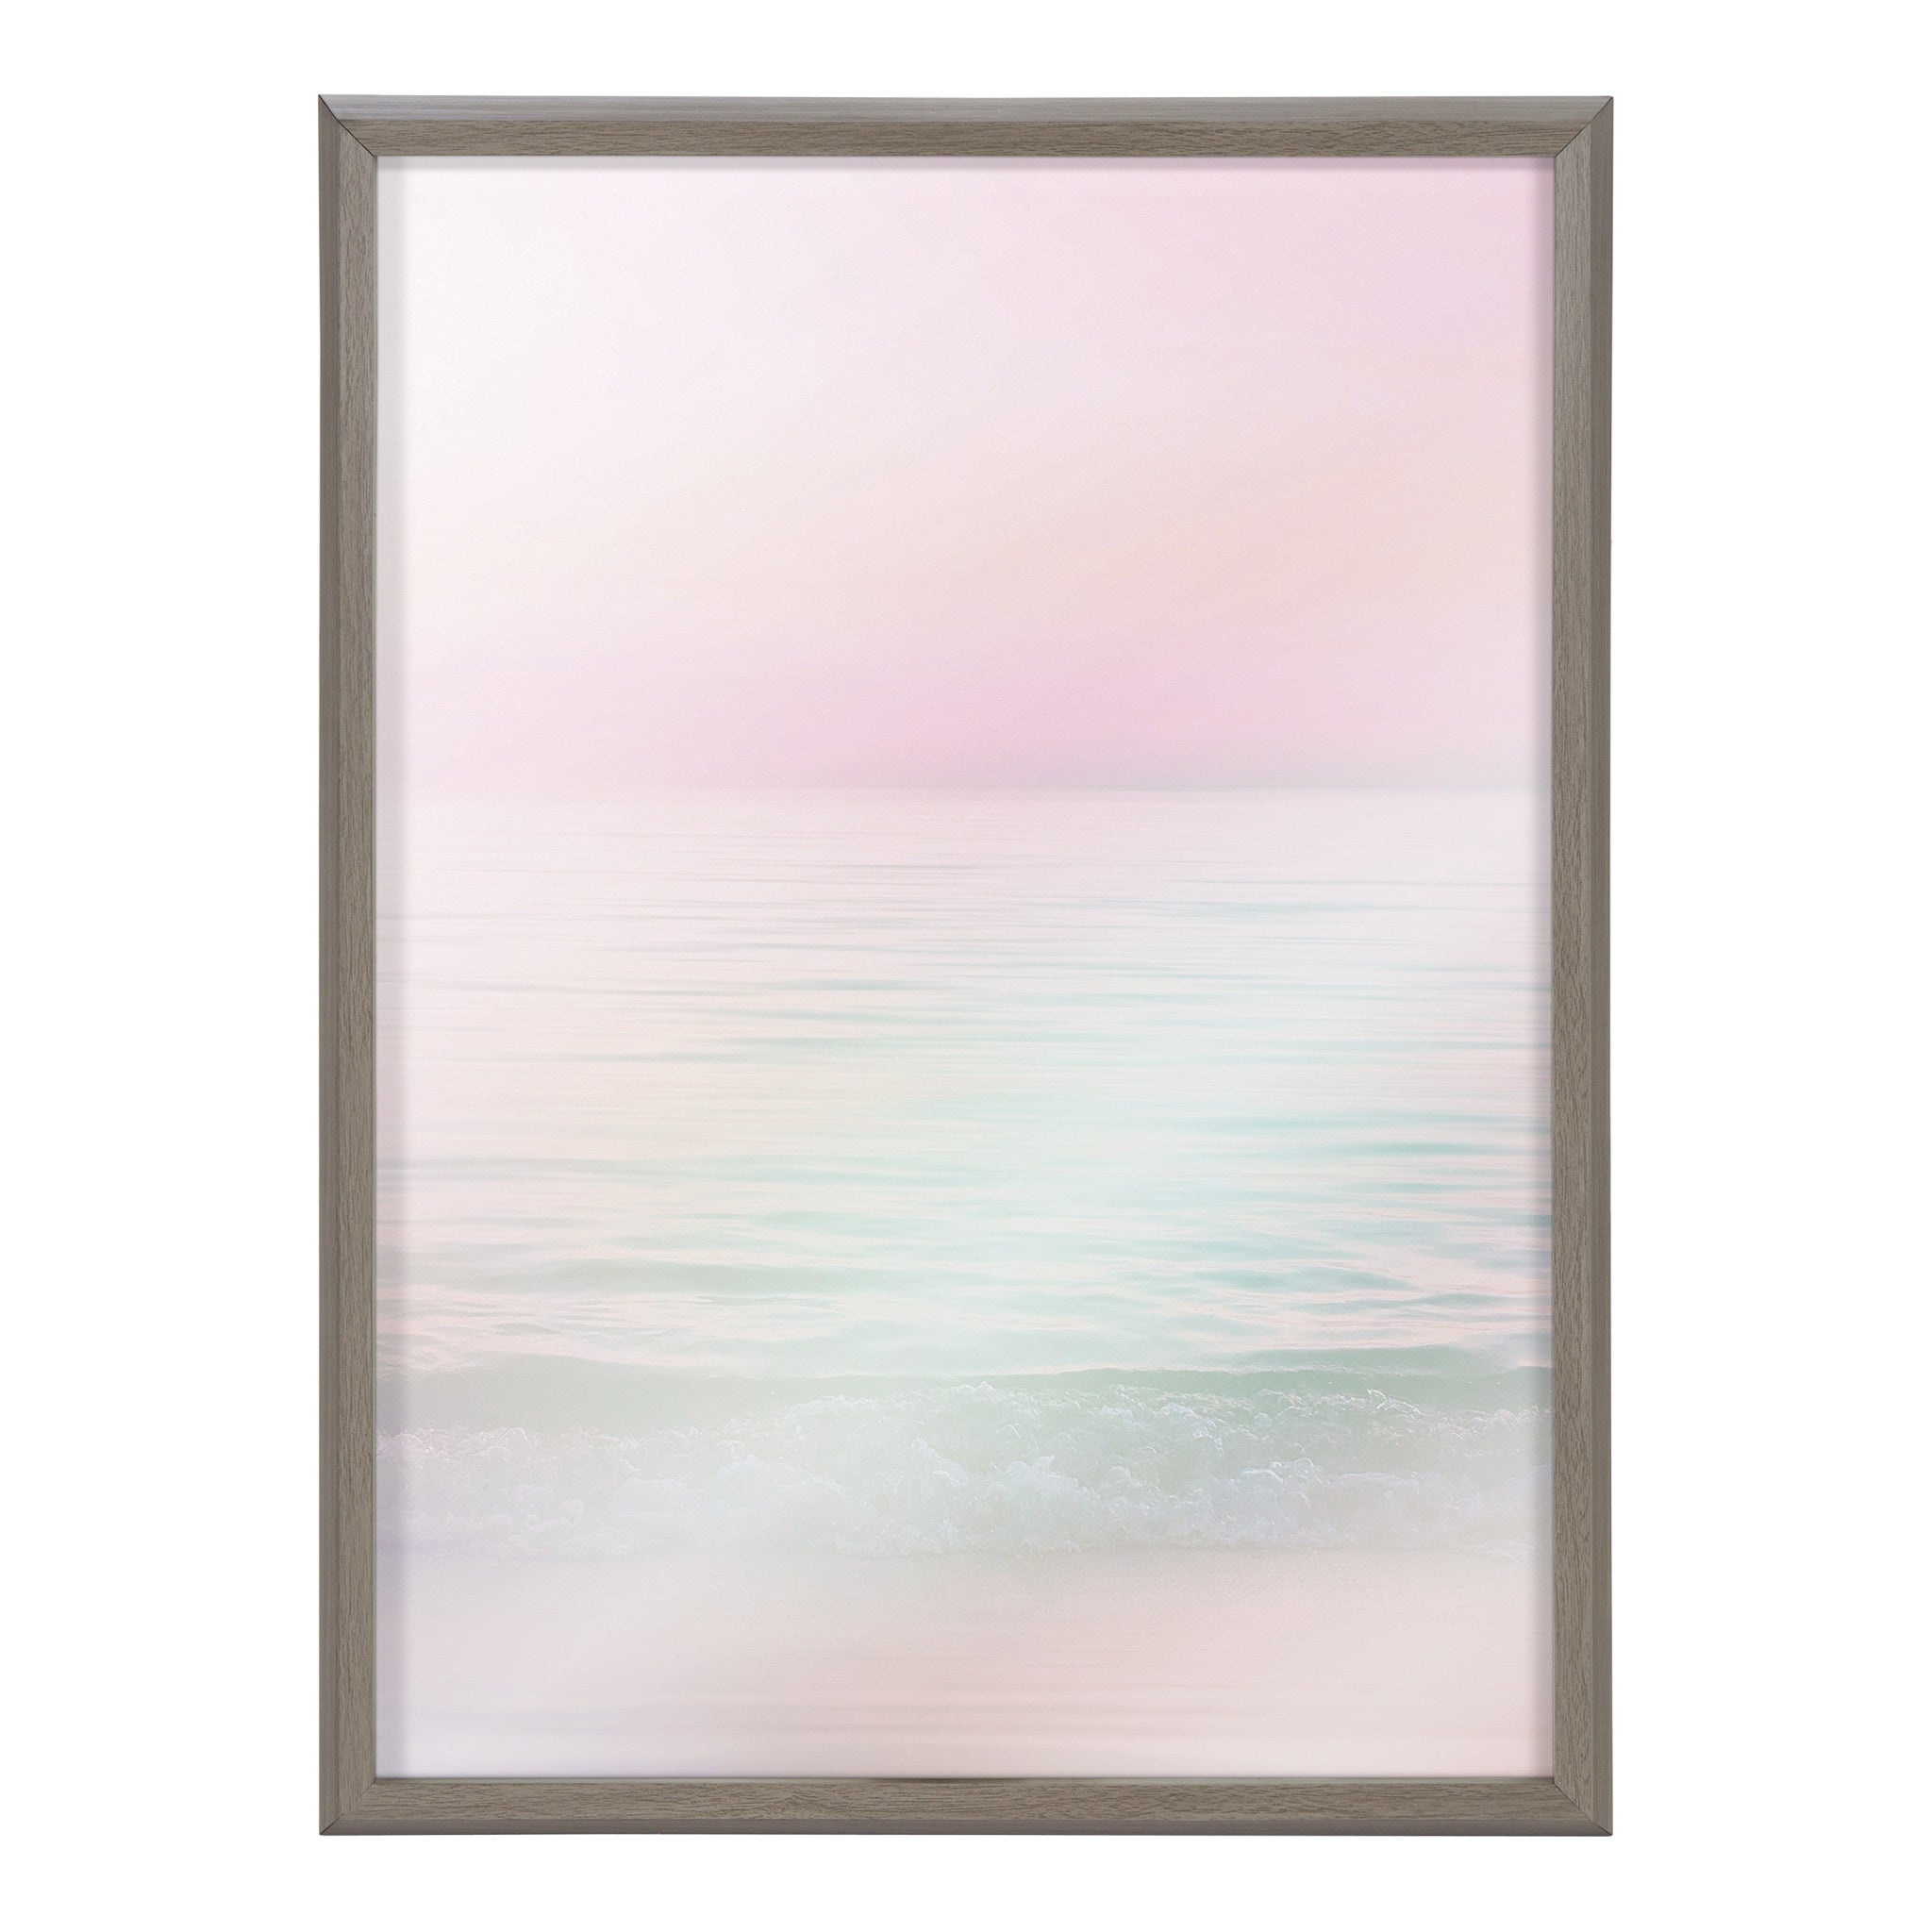 Blake Dreamy Pastel Seascape Framed Printed Glass by Dominique Vari